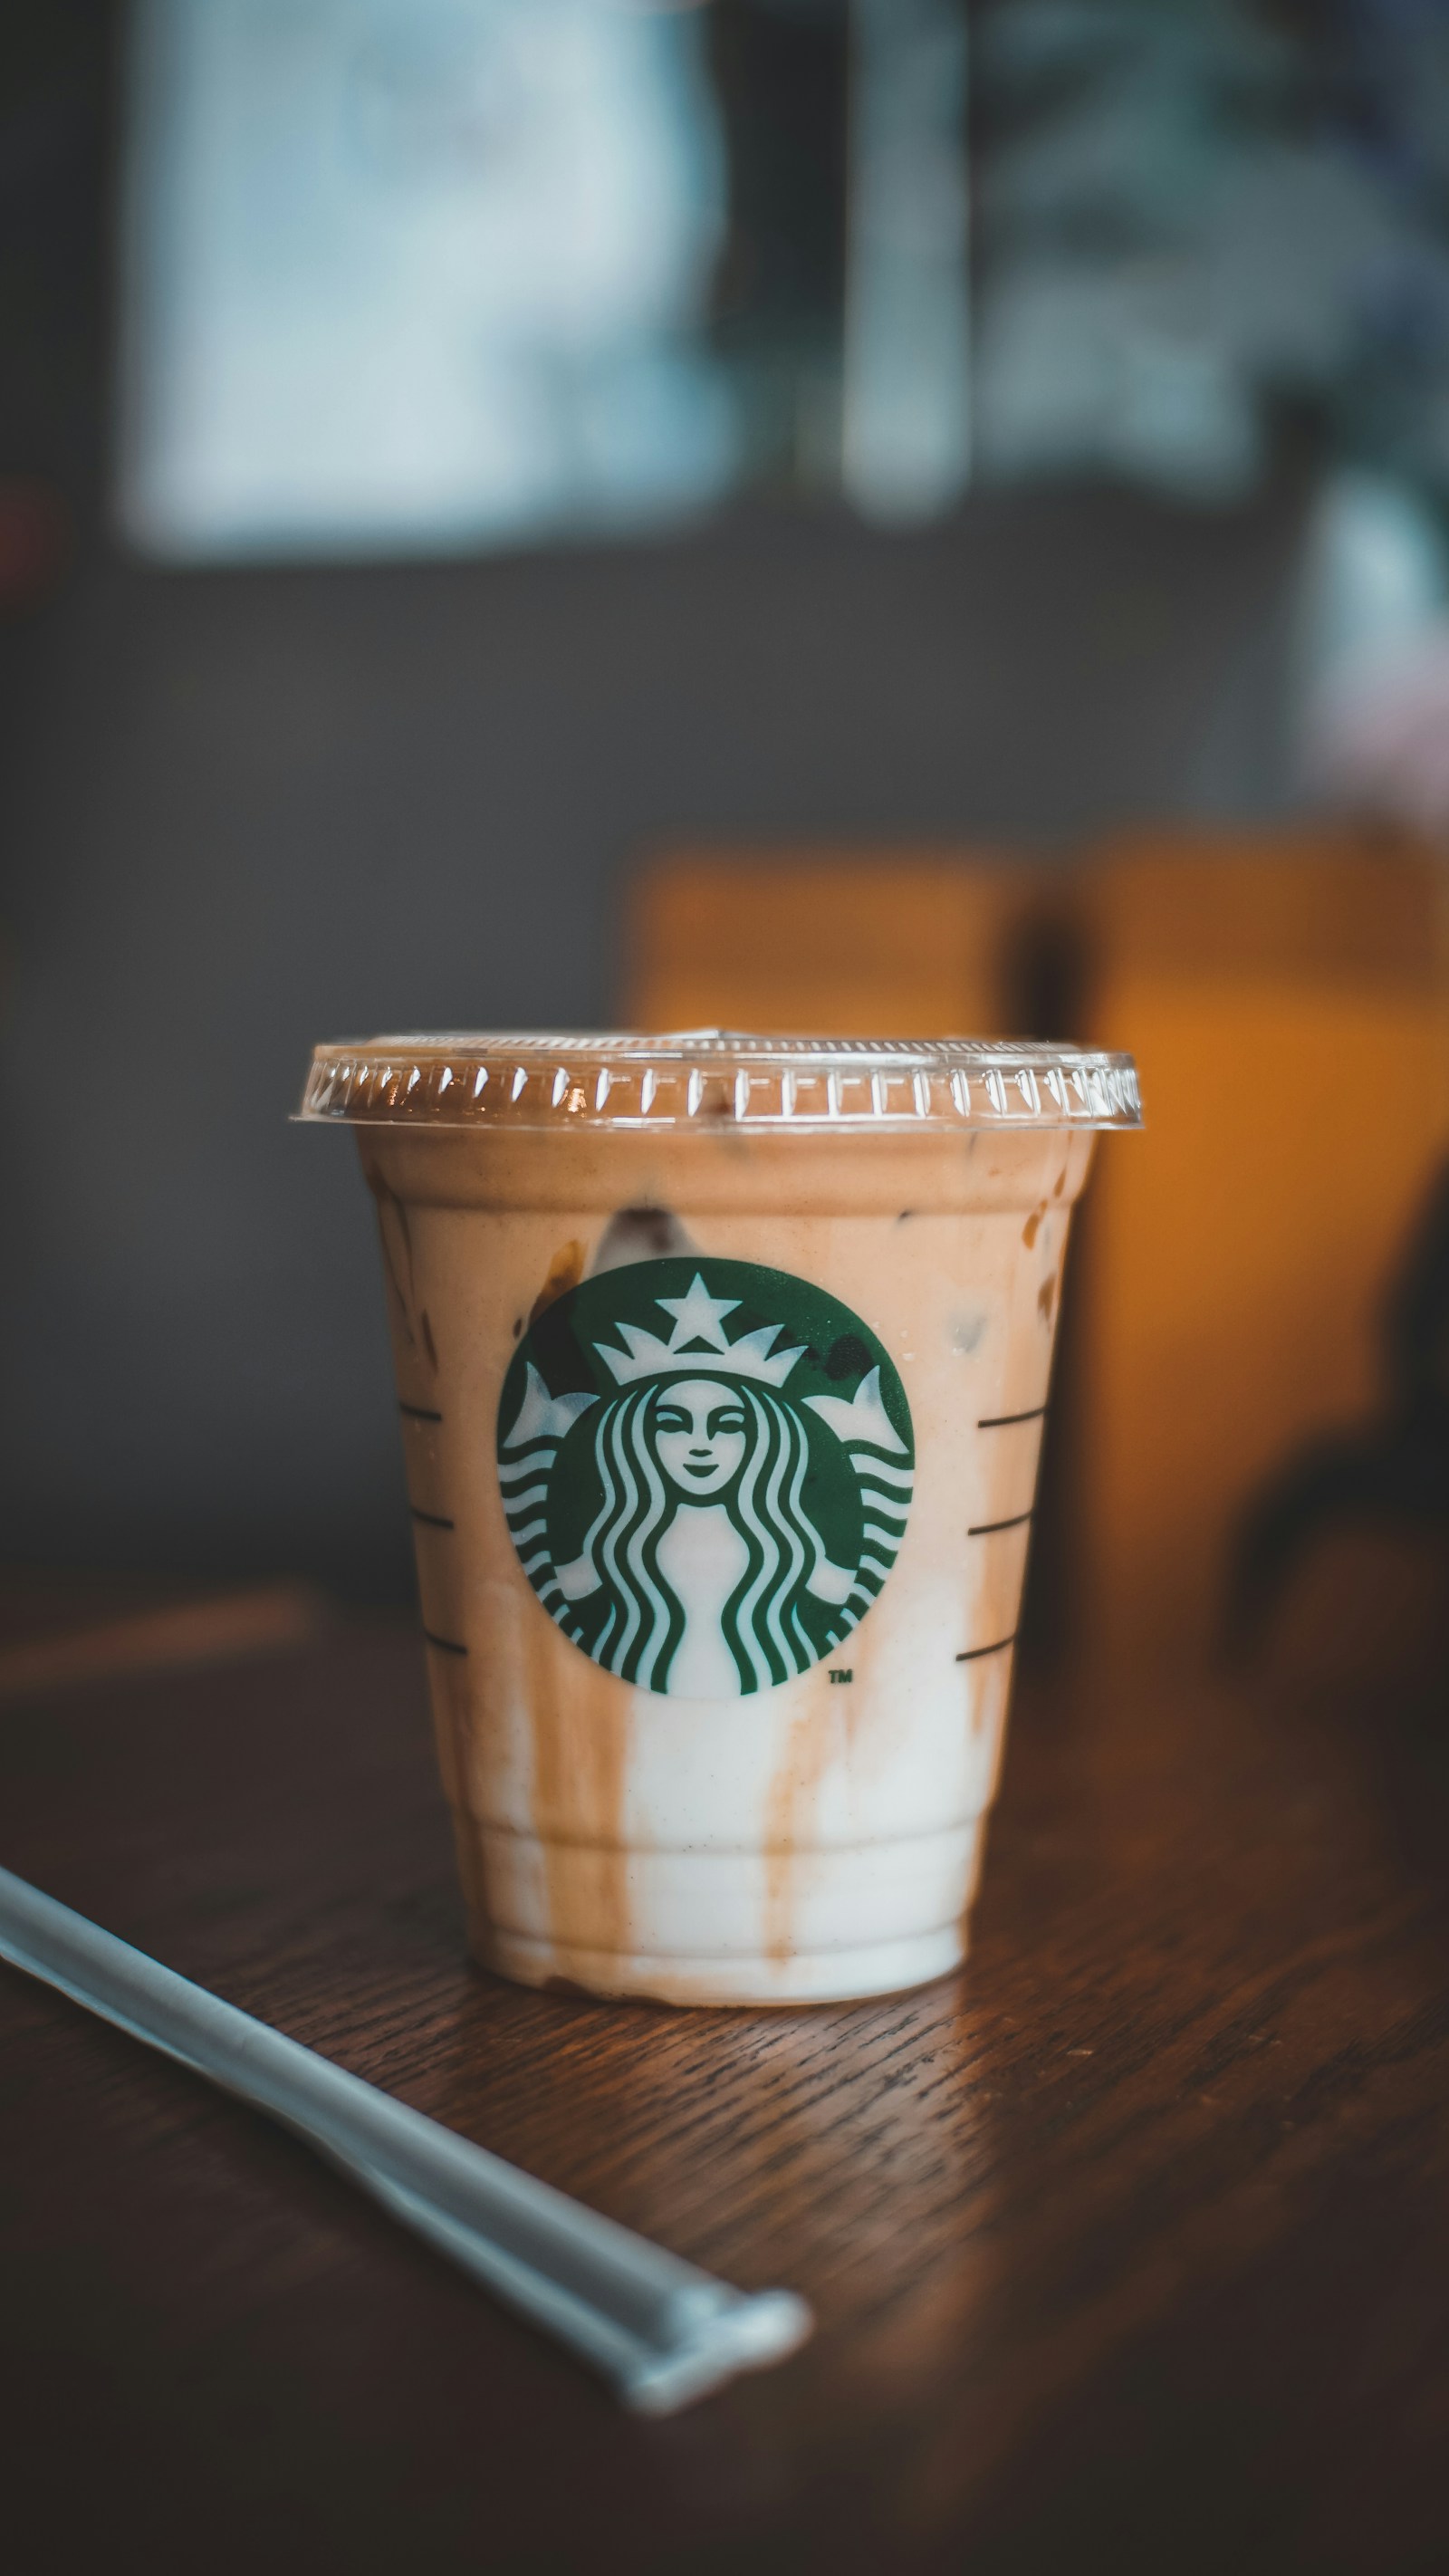 Cloverdale Starbucks Meet and Greet - Tips from your local Cloverdale Real Estate Specialists